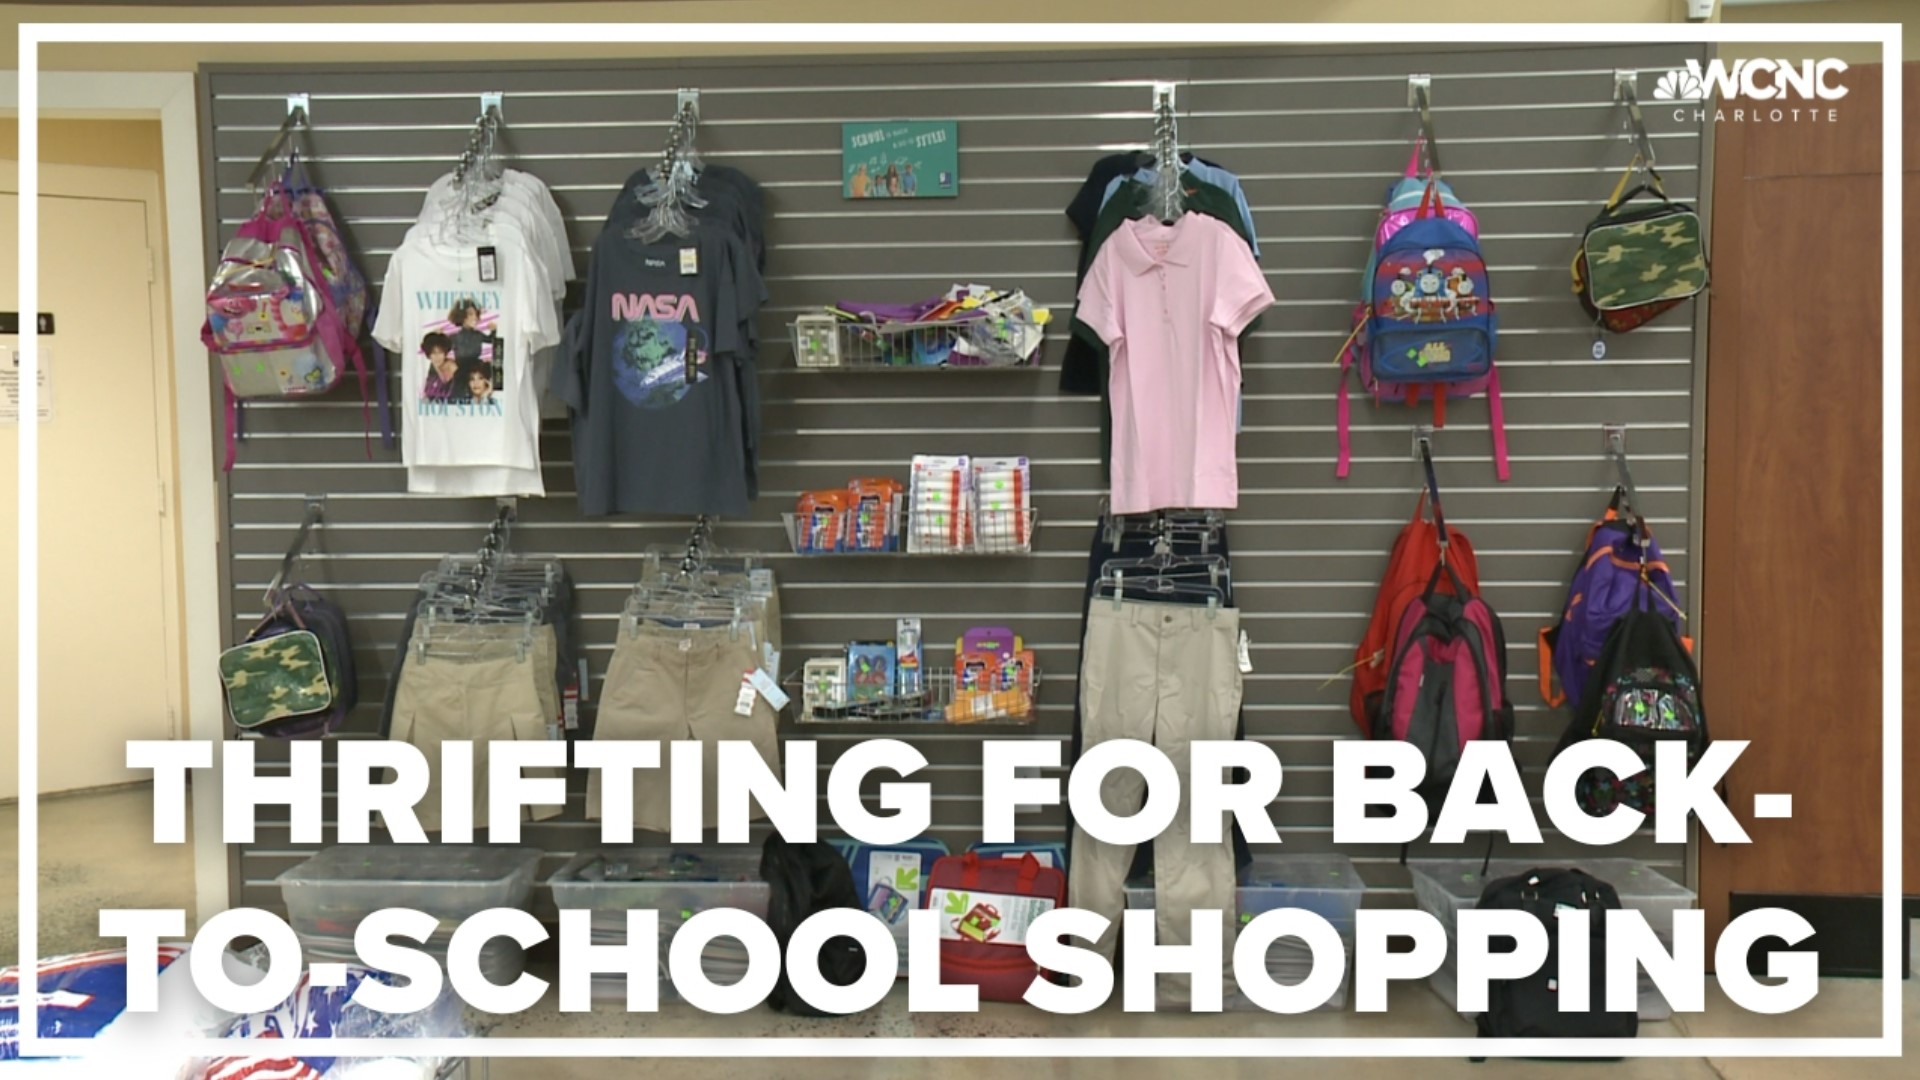 According to a survey from U.S. News & World Report, 31.9% of back-to-school shoppers are planning to buy secondhand products this year.